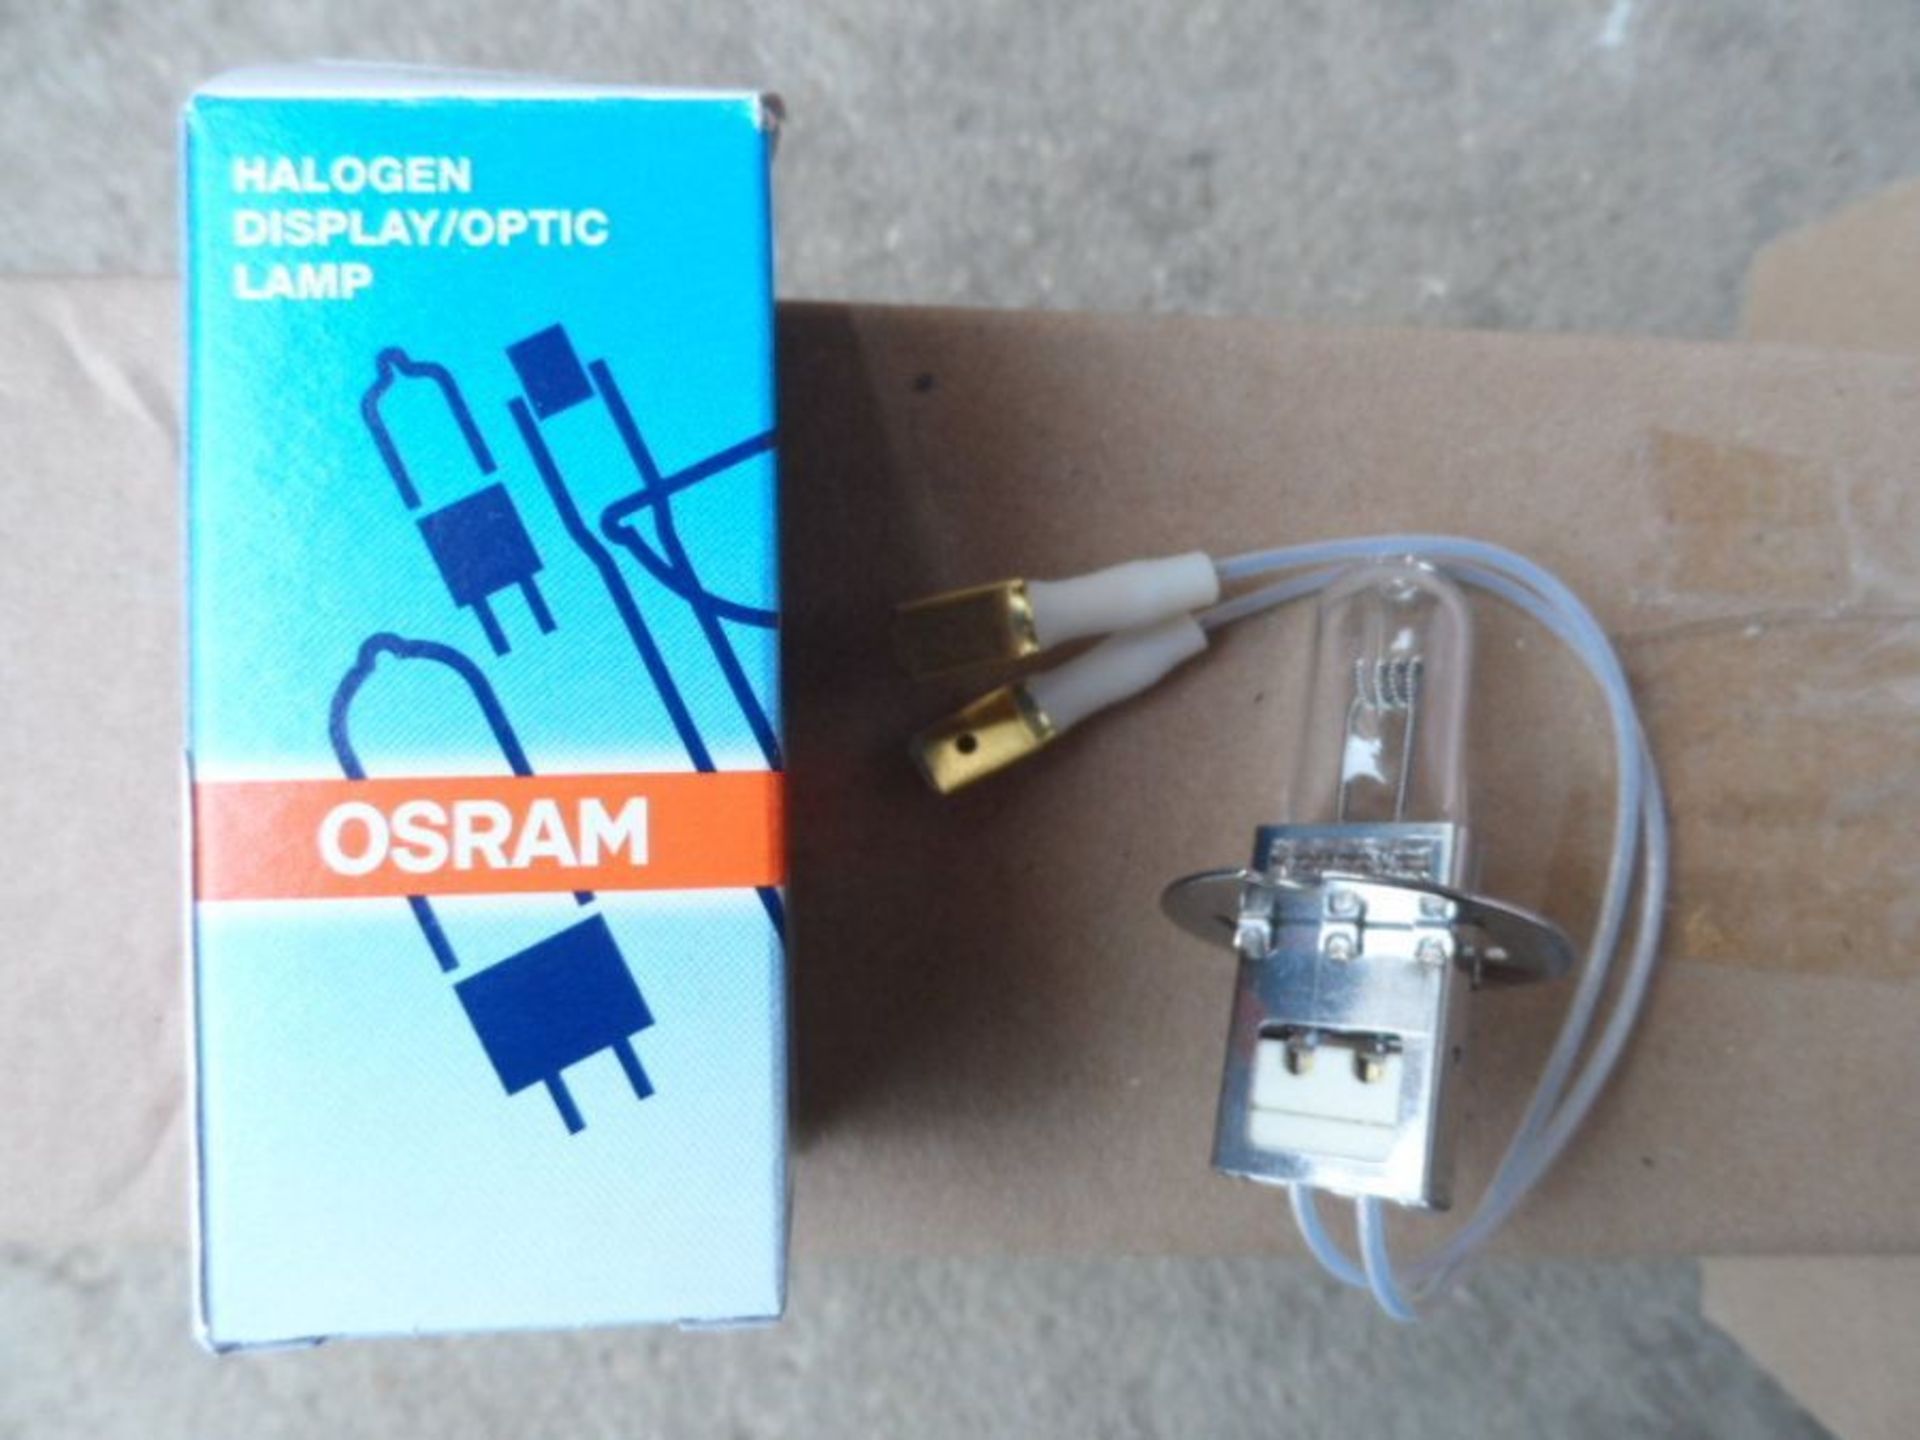 Large Quantity of Osram Halogen Airfield / Runway Lamps - around 960 retail at £20 each - £18k!! - Image 2 of 2